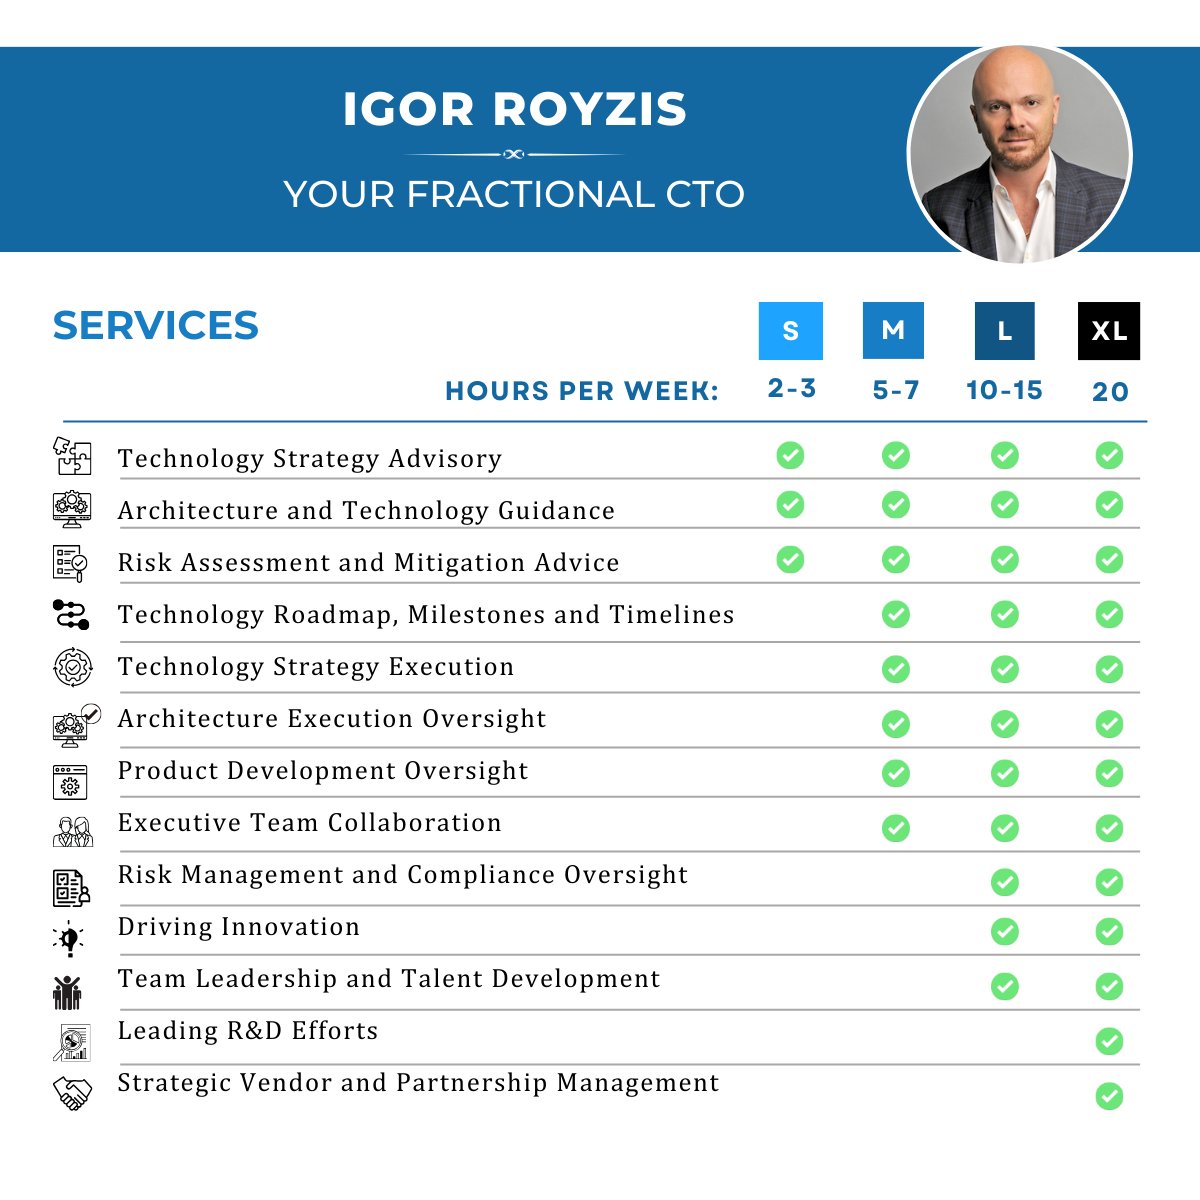 MY SERVICES

Schedule your free consultation with me by clicking the link below!
calendly.com/iroyzis/30min

#FractionalCTO #Startups, #Technology, #CTO, #TechLeadership, #StartupGrowth